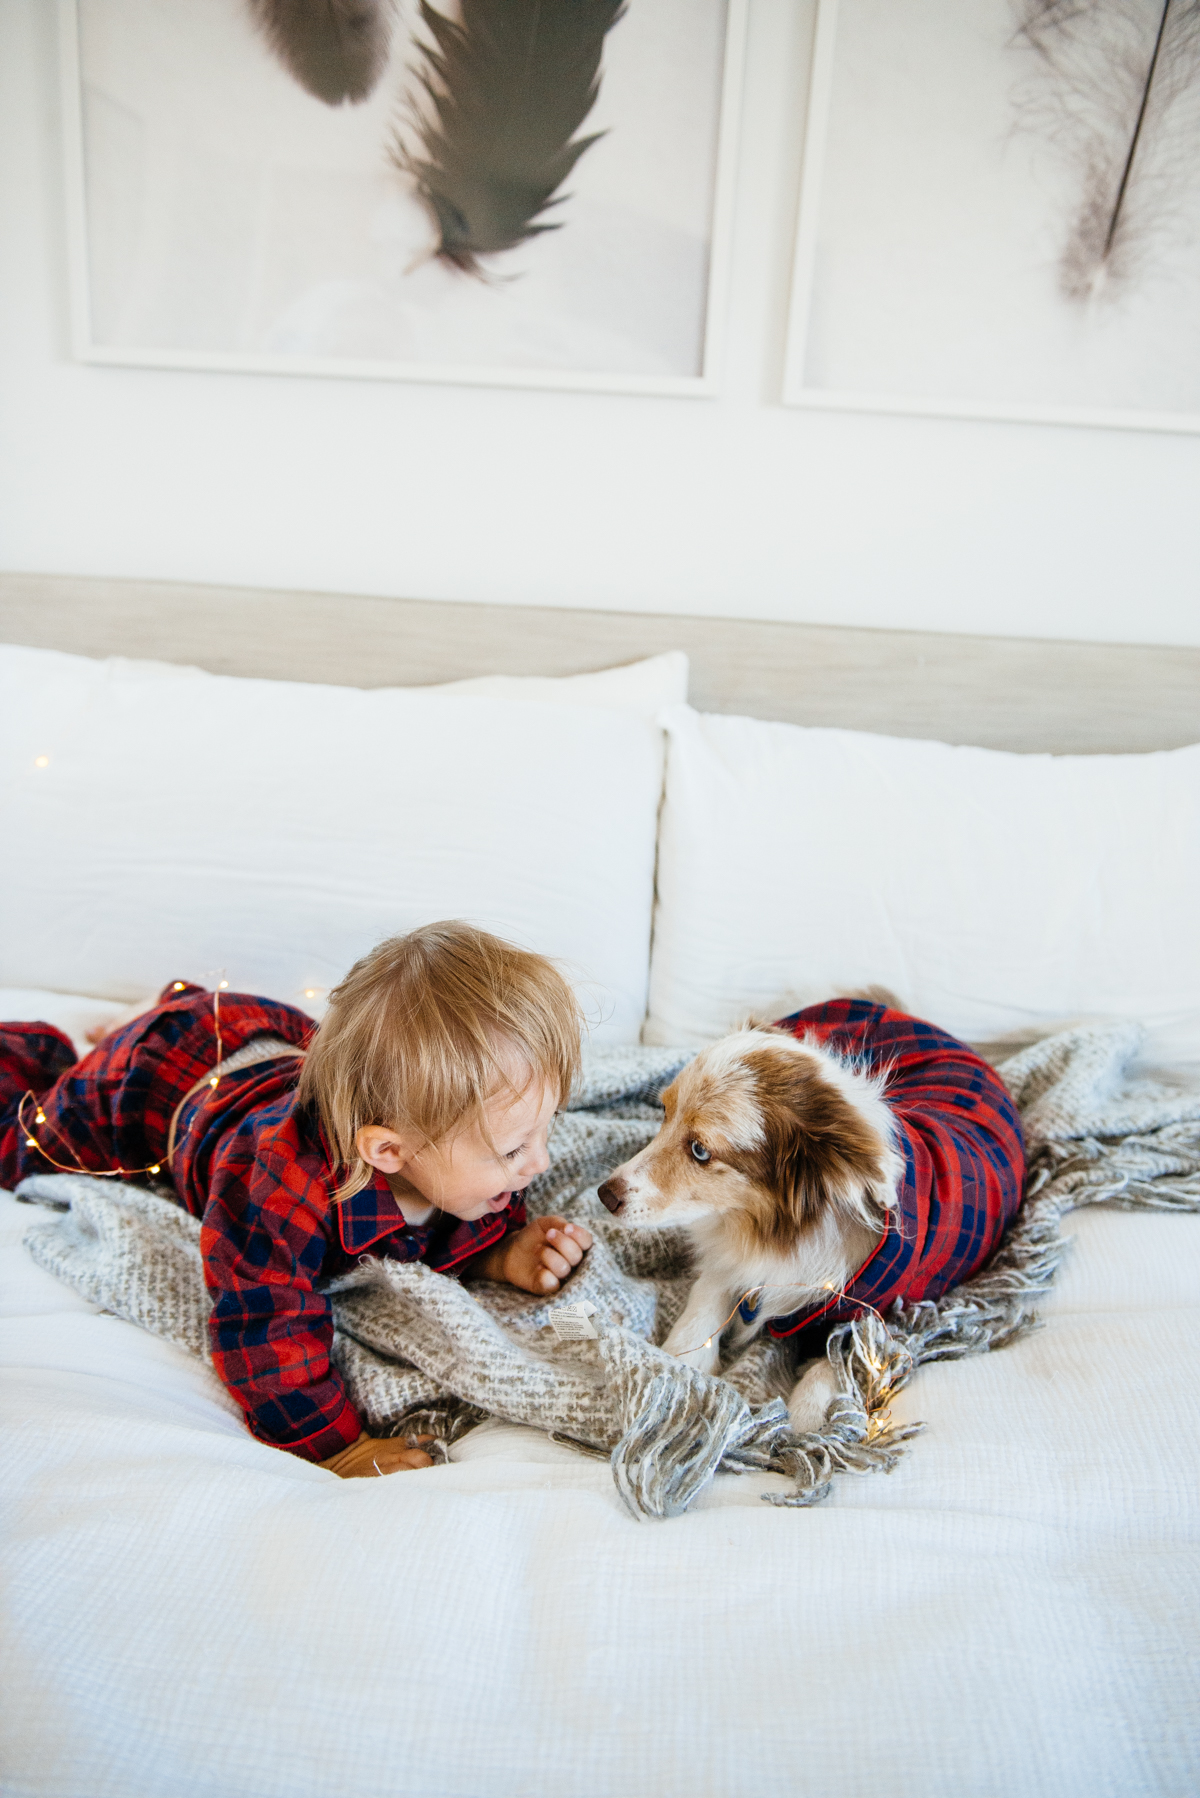 Kimberly Lapides of eatsleepwear sharing her favorite kids and toddler pajamas featuring 1212, clover baby & kids, target, gap kids, h&m kids. Showing toddler and dog in matching plaid pajamas from janie and jack.